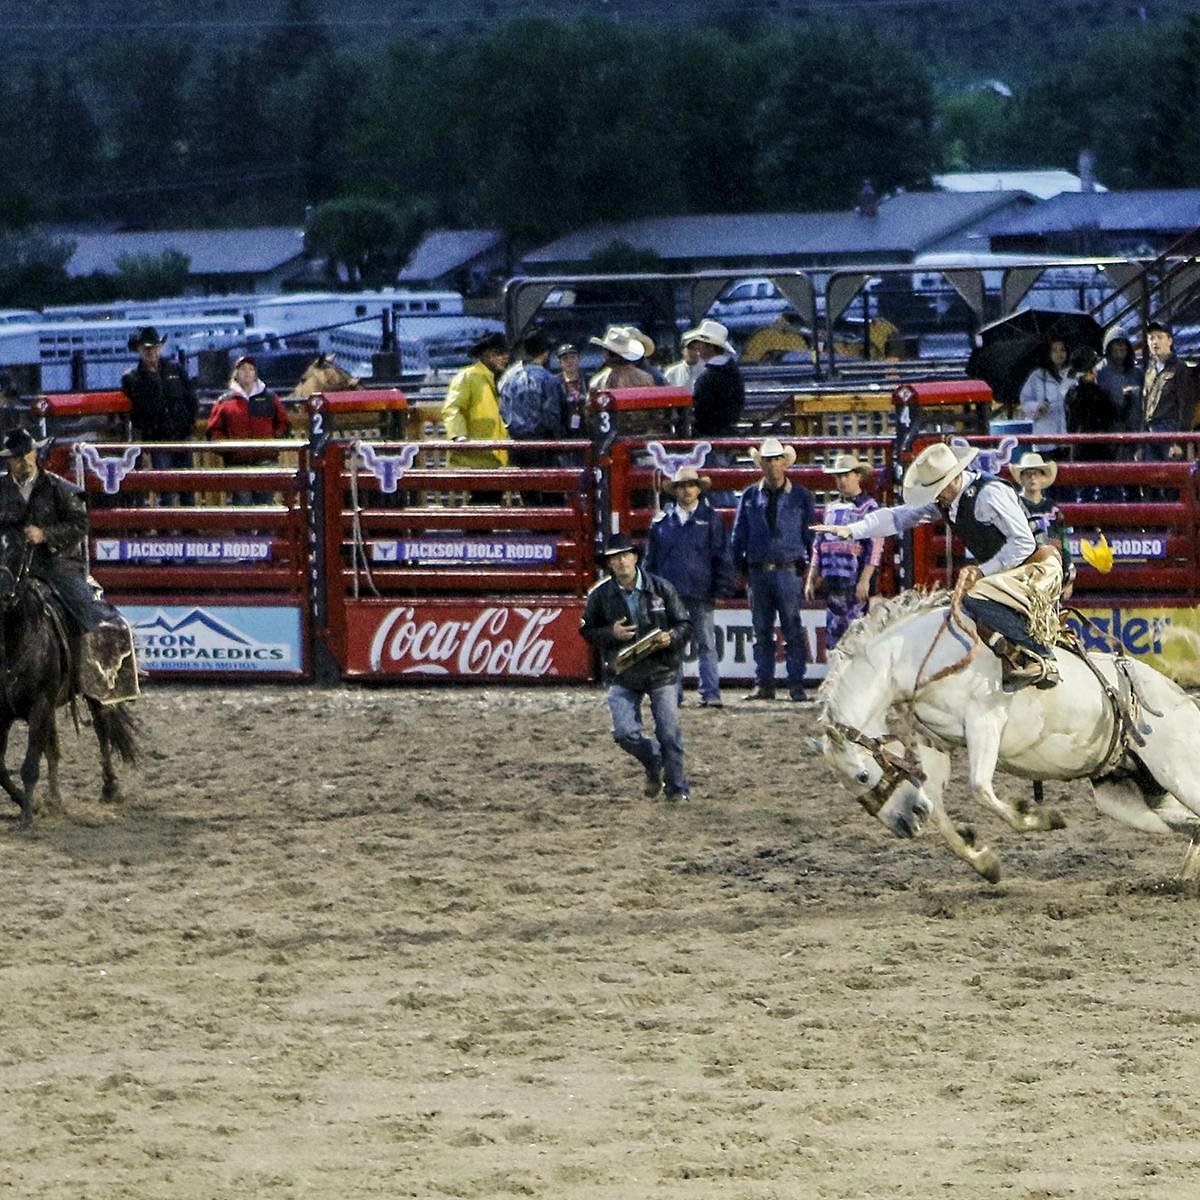 JACKSON HOLE RODEO All You Need to Know BEFORE You Go